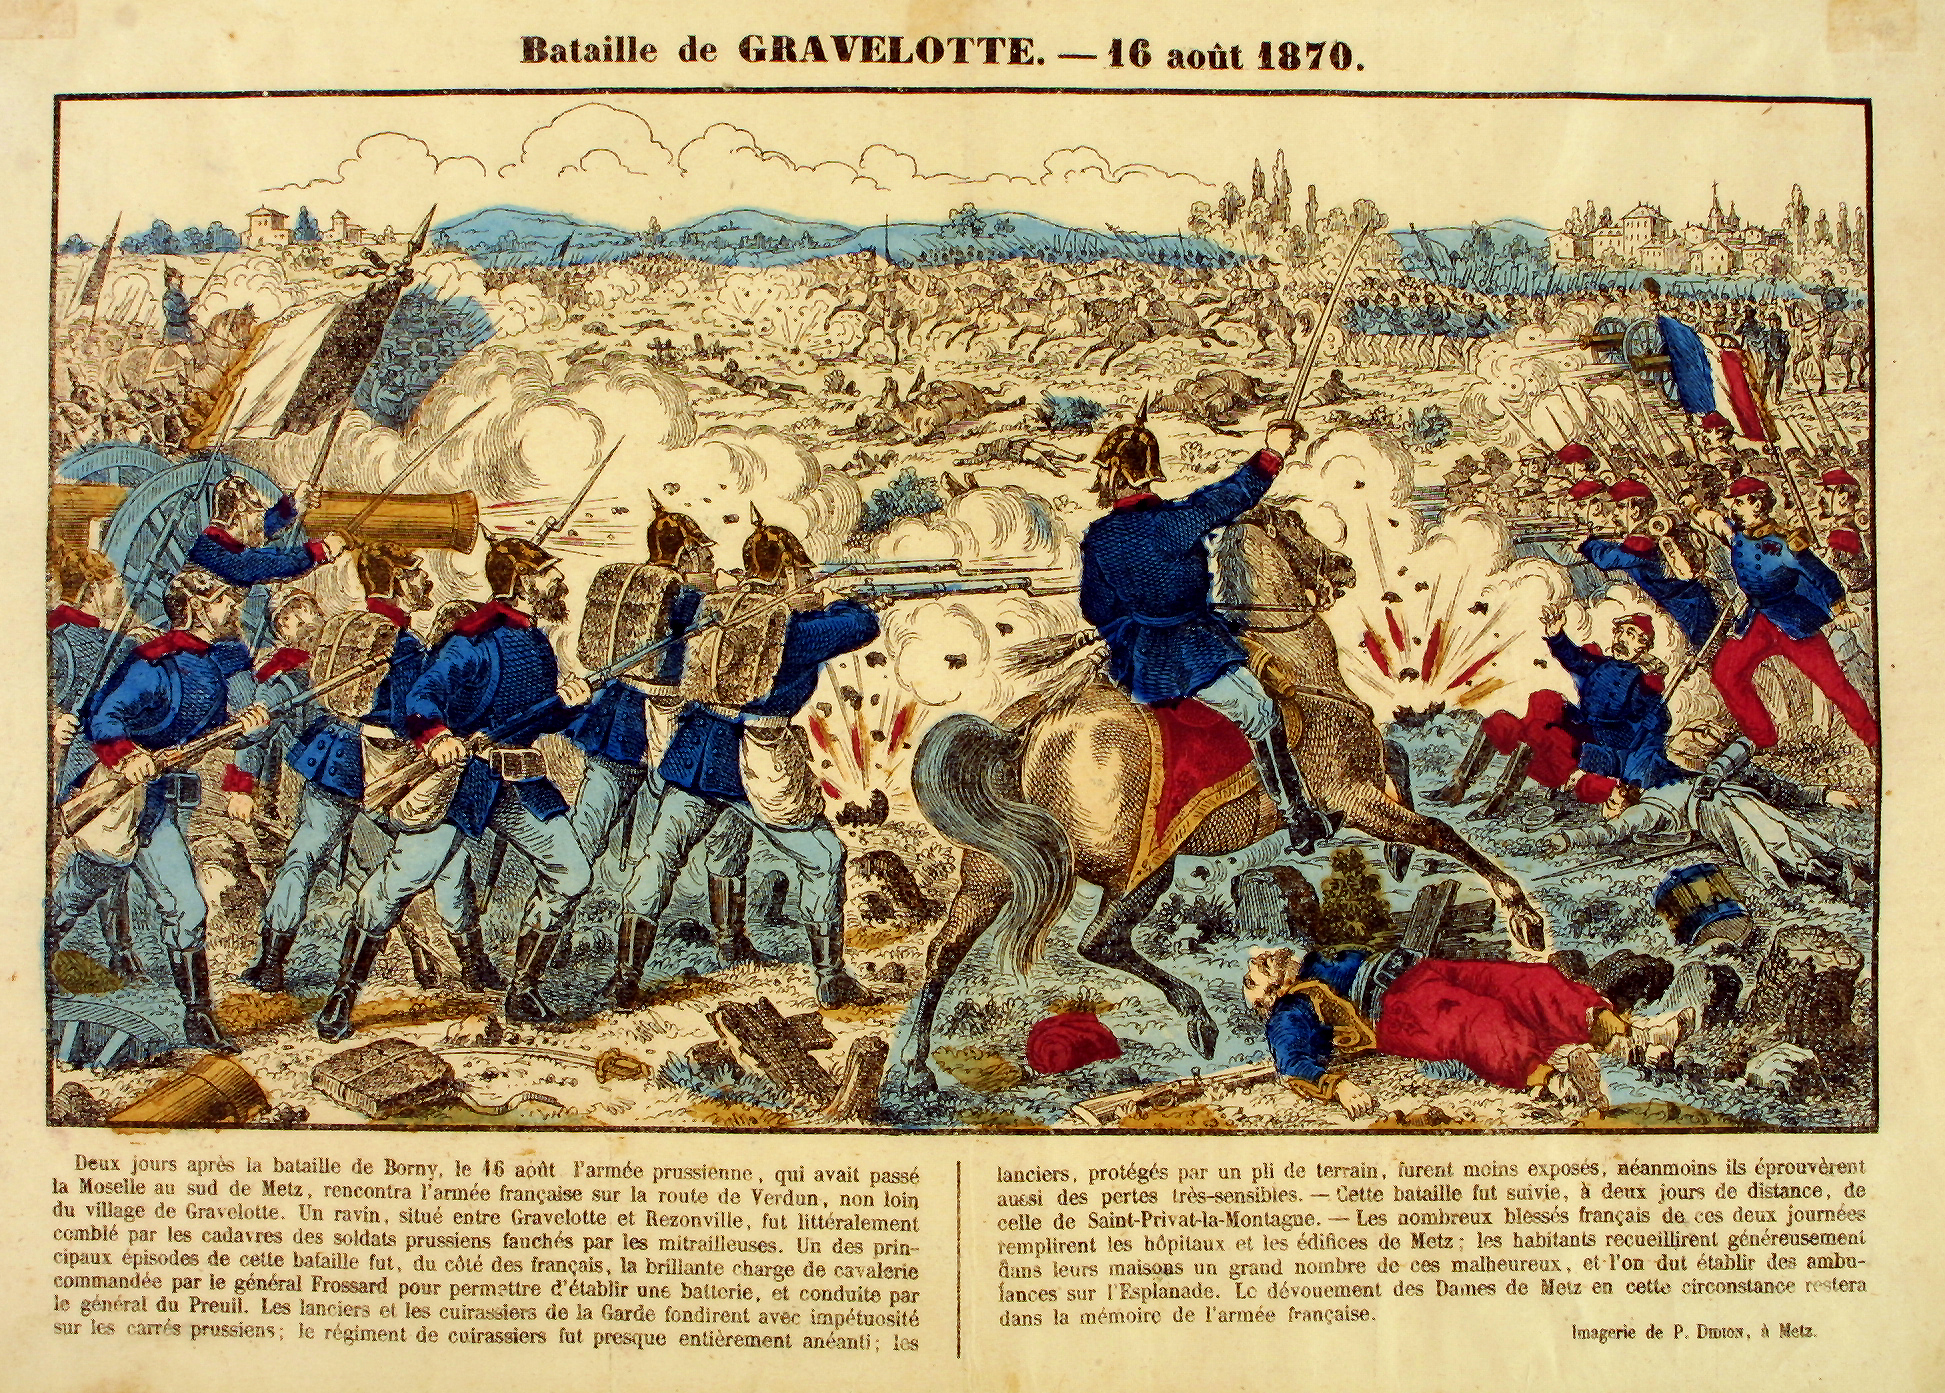 an article in the times of war with images of soldiers attacking